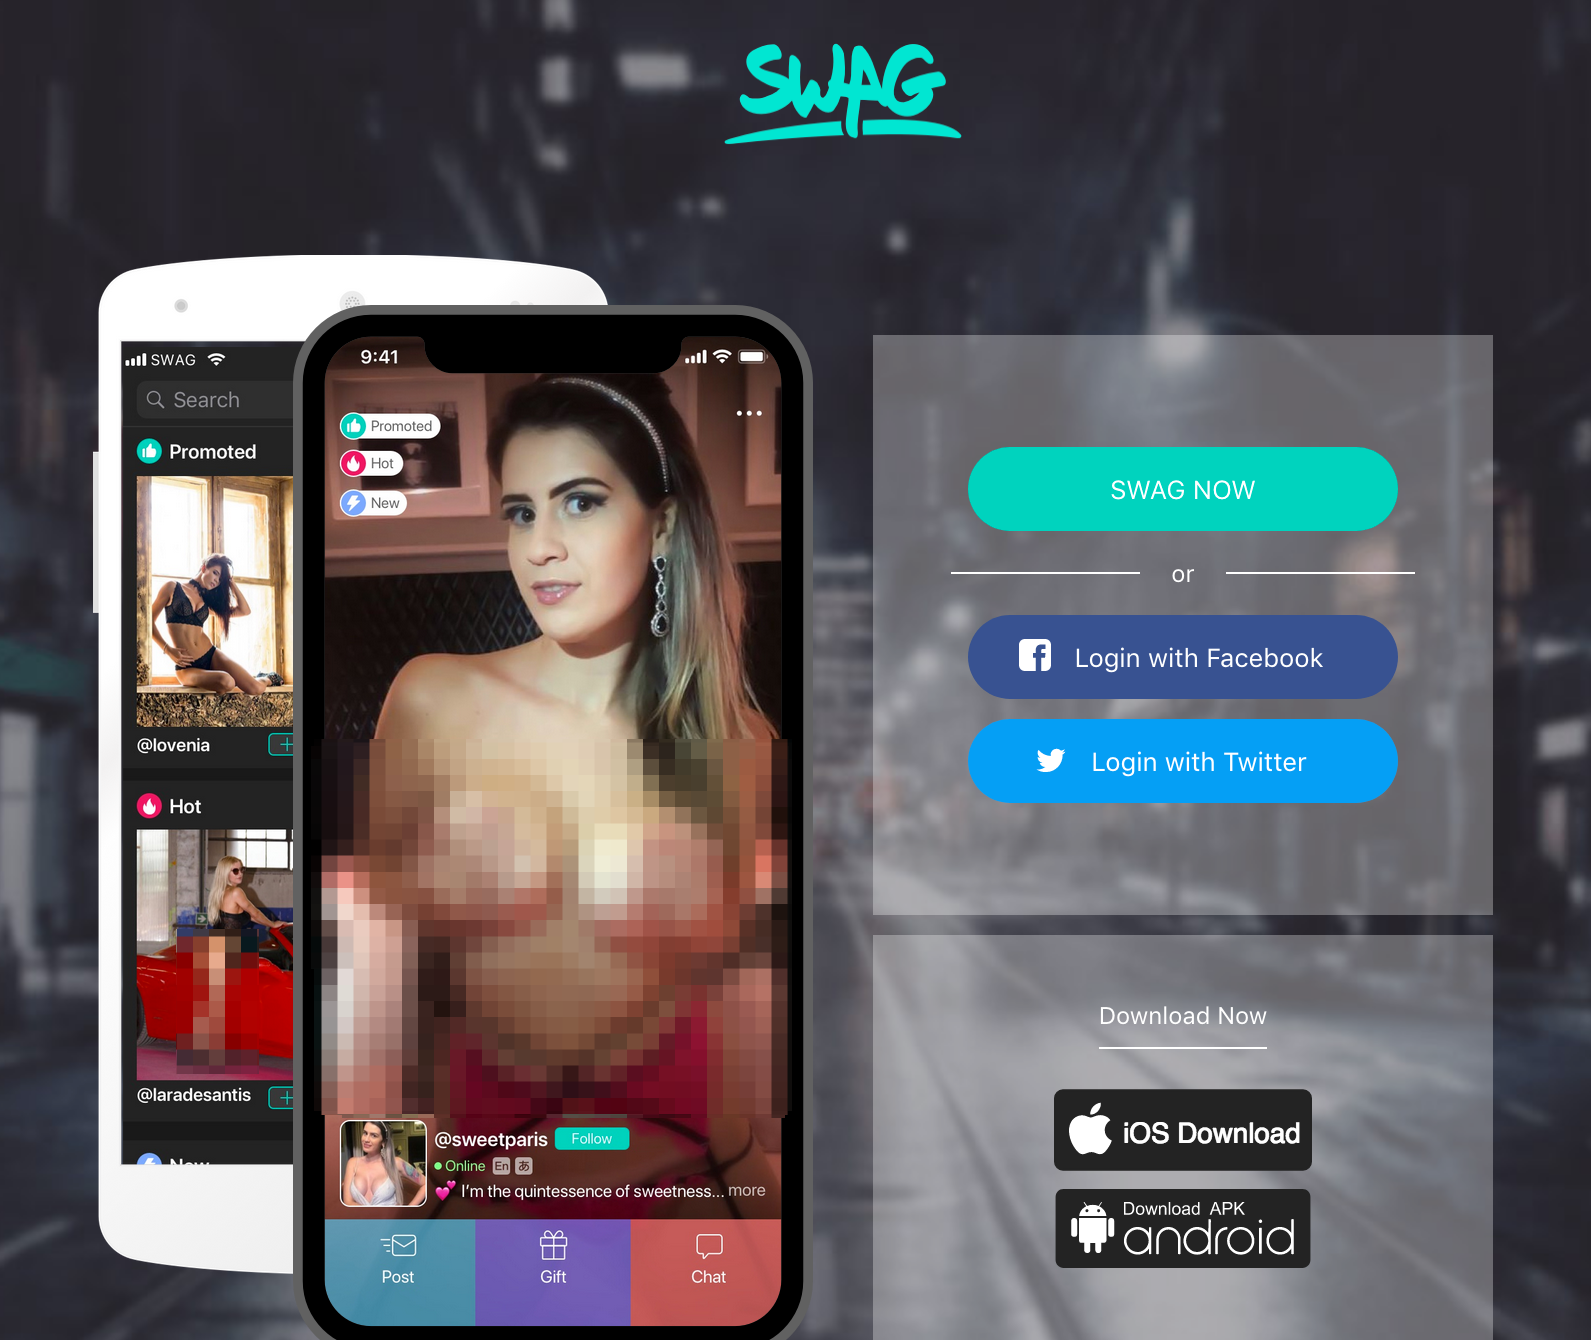 Porn apps like Swag openly advertise their availability on iOS.